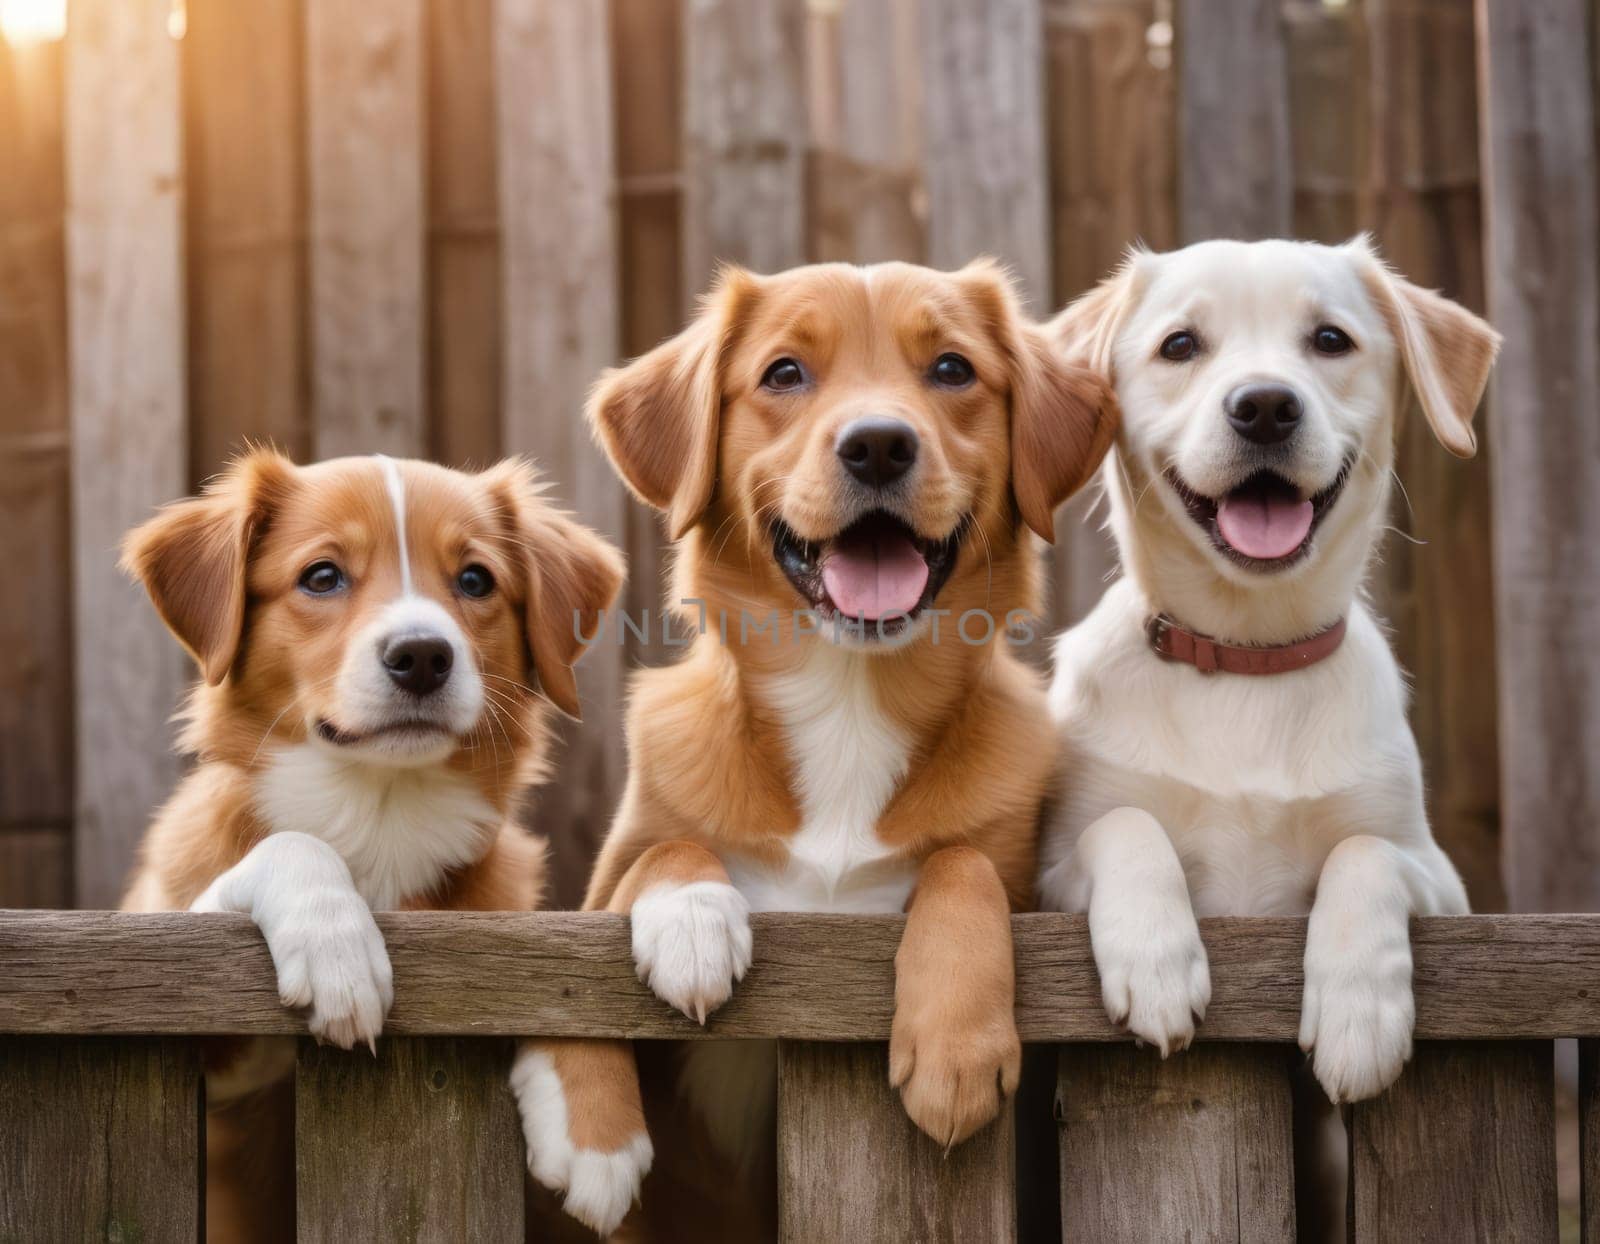 Three funny dogs with look over a fence, bathed in the warm glow of a sunset